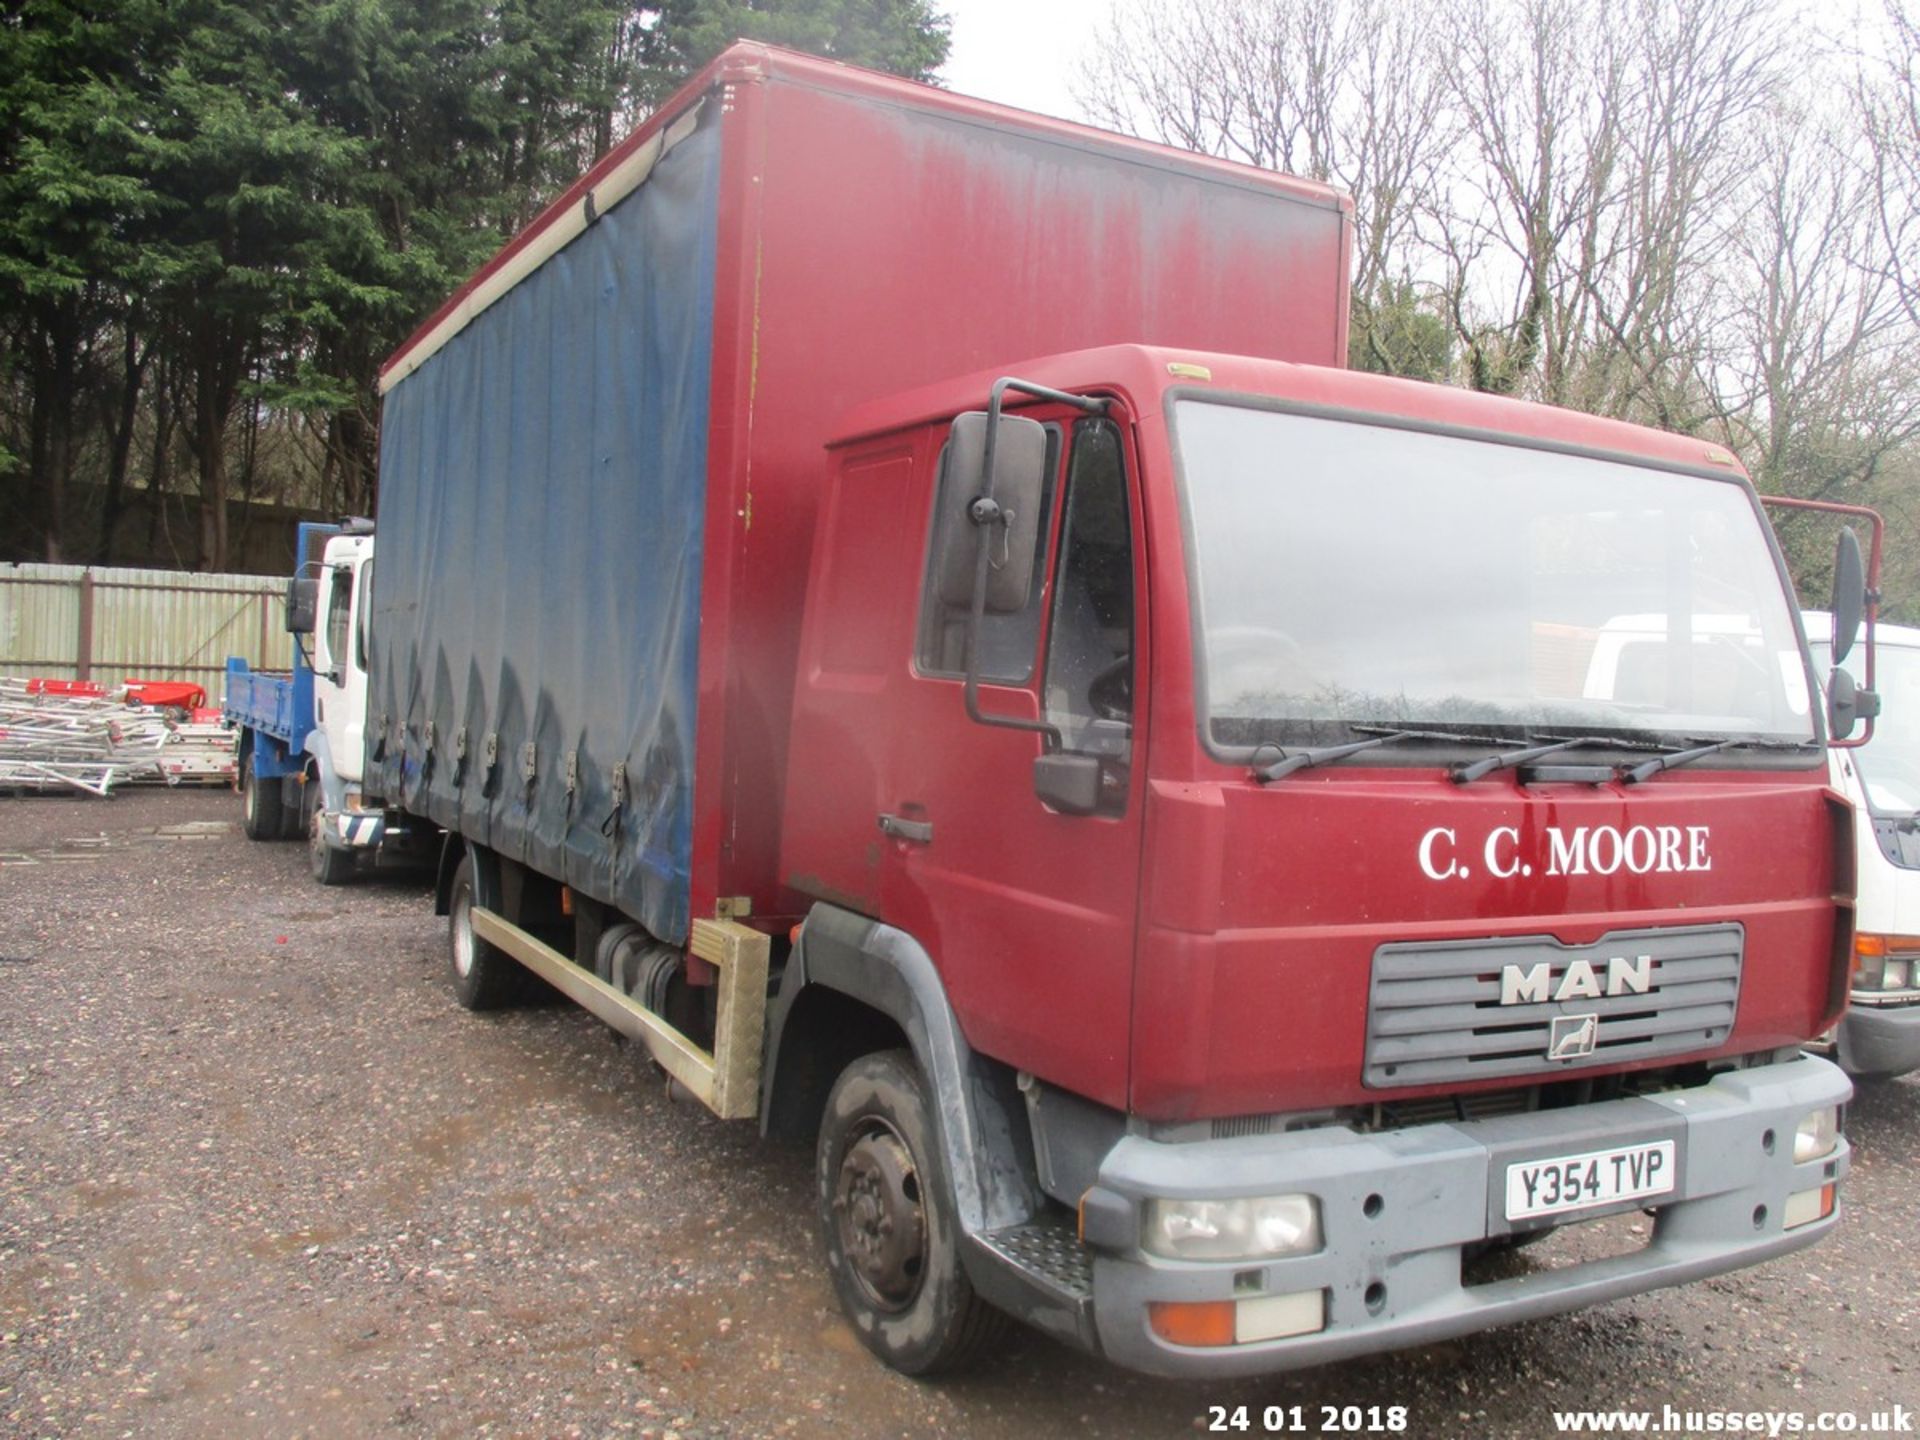 MAN CURTAINSIDE 7.5 TON LORRY,MOT MAY 2018,514000KM, 2 OWNERS, Y354 TVP